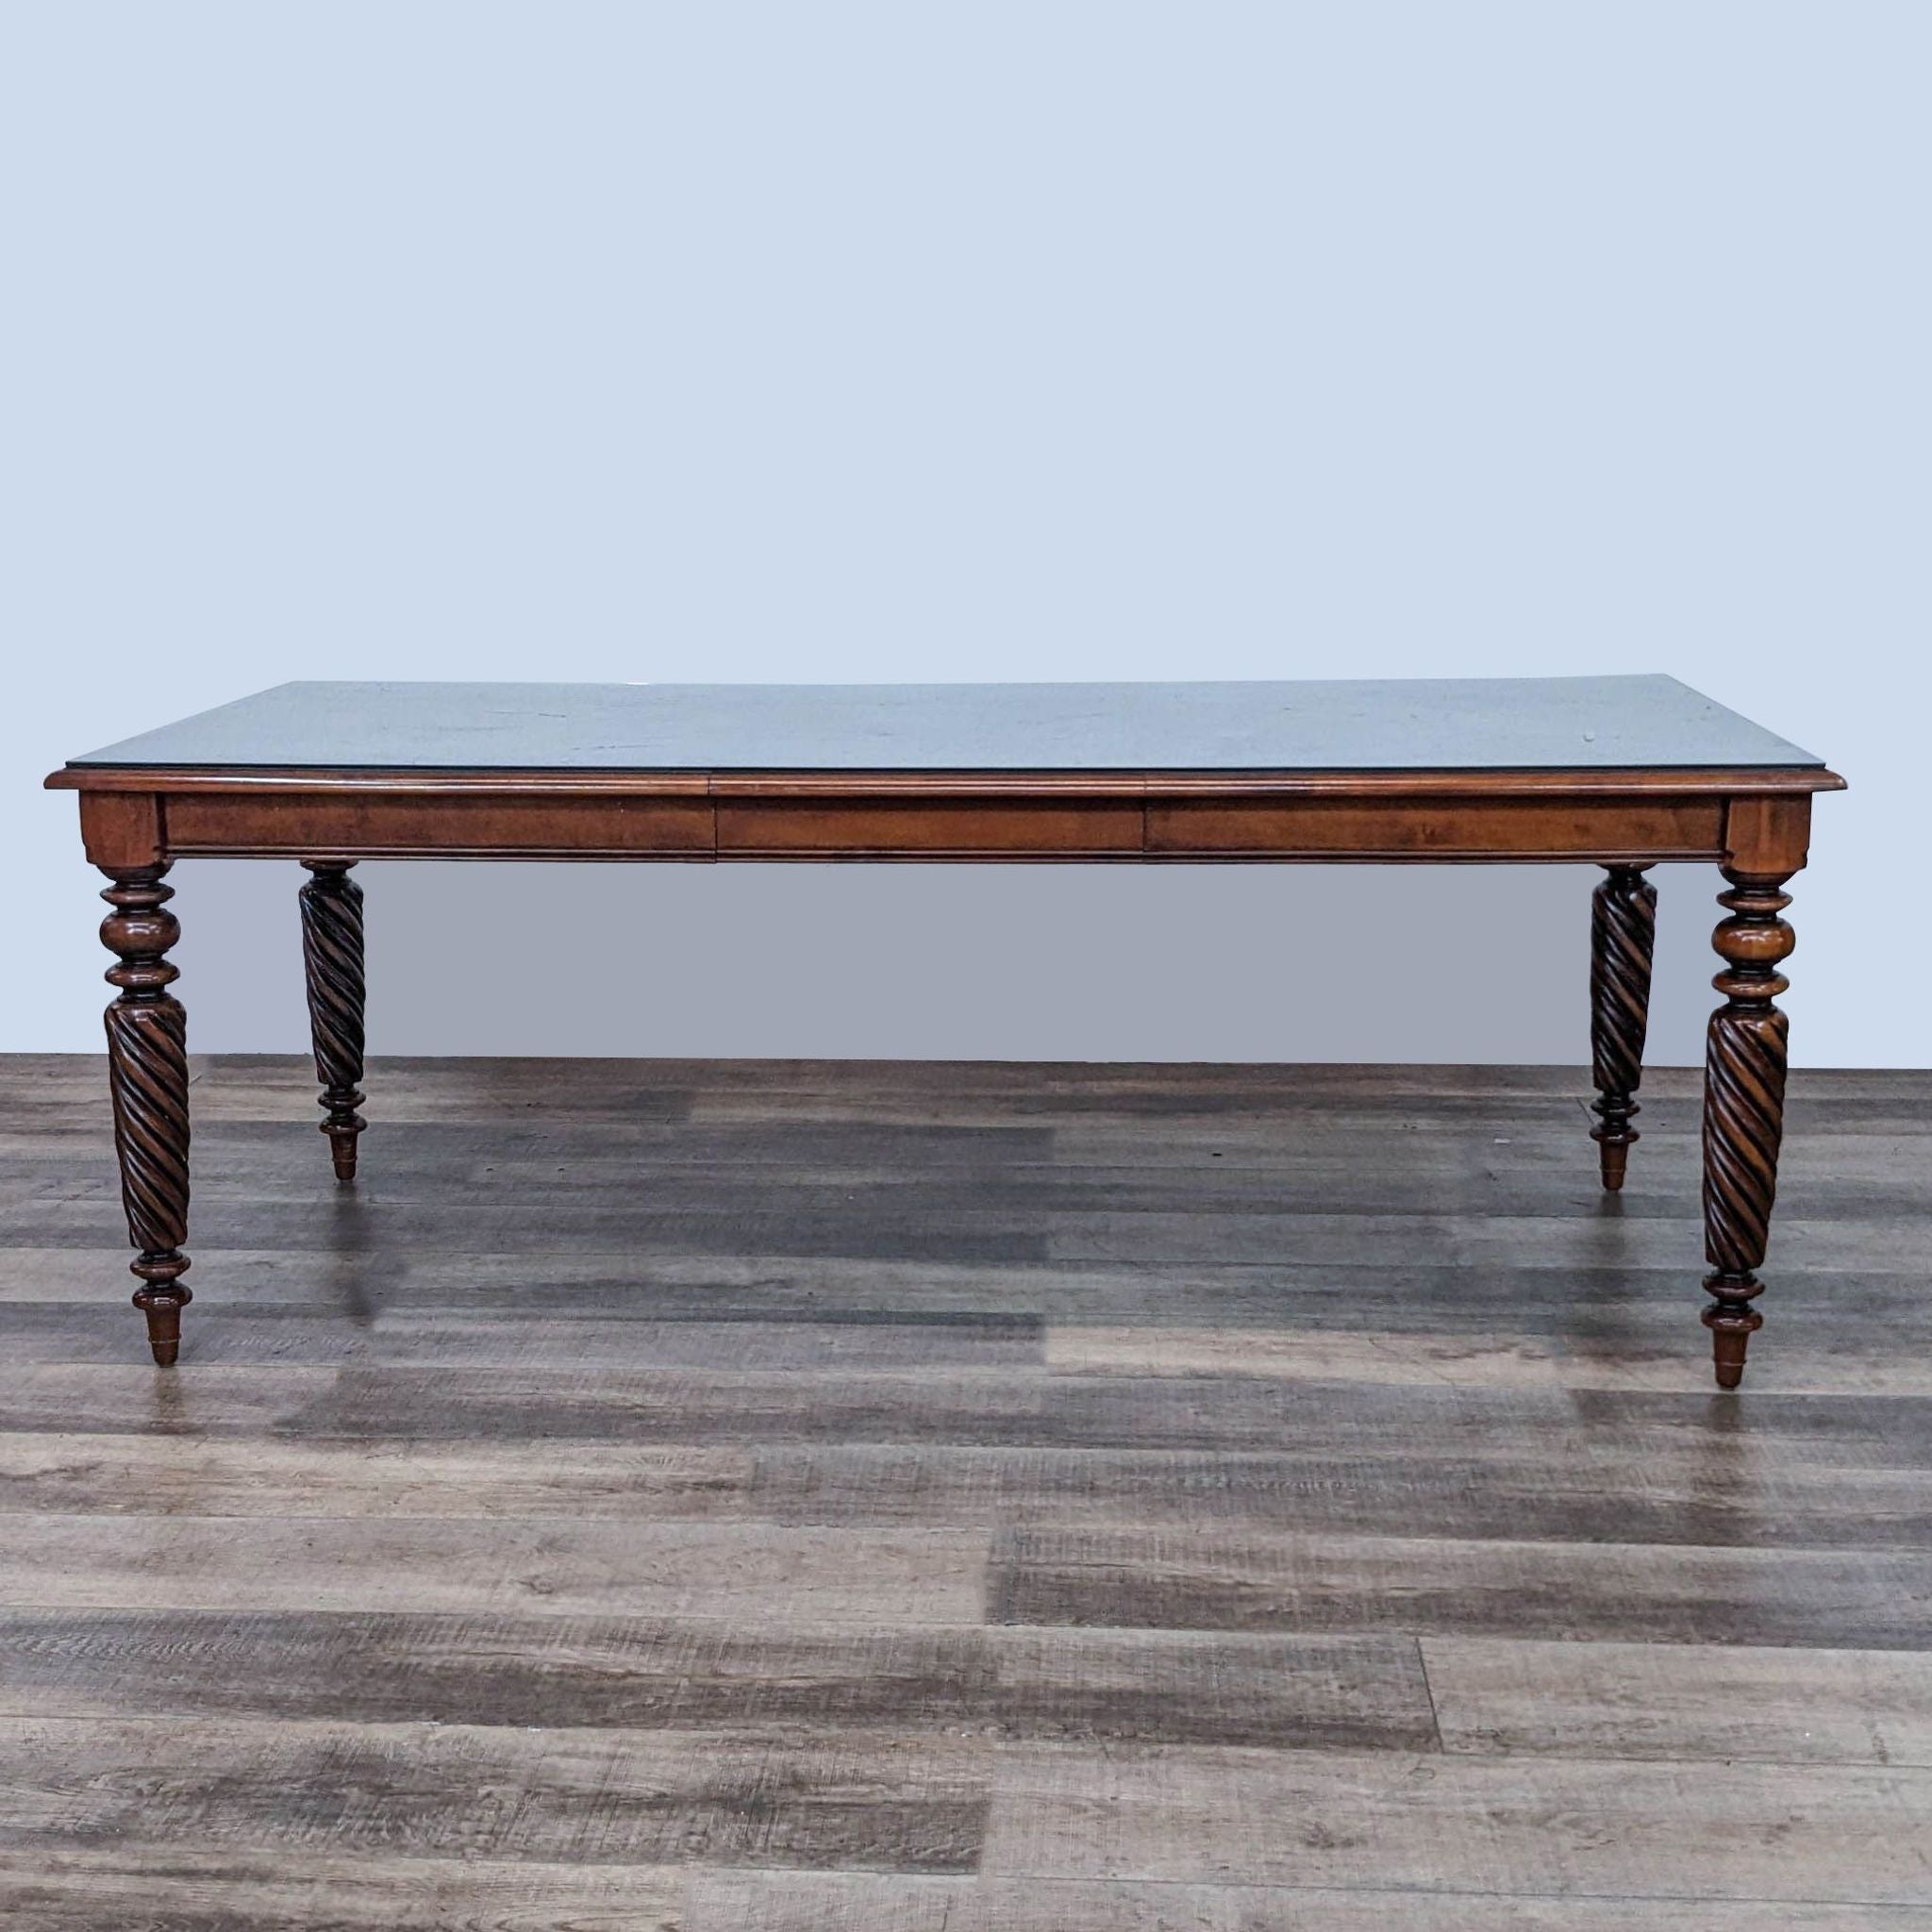 Reperch brand Early American Harvest Style extendable dining table with twisted legs on wood floor.